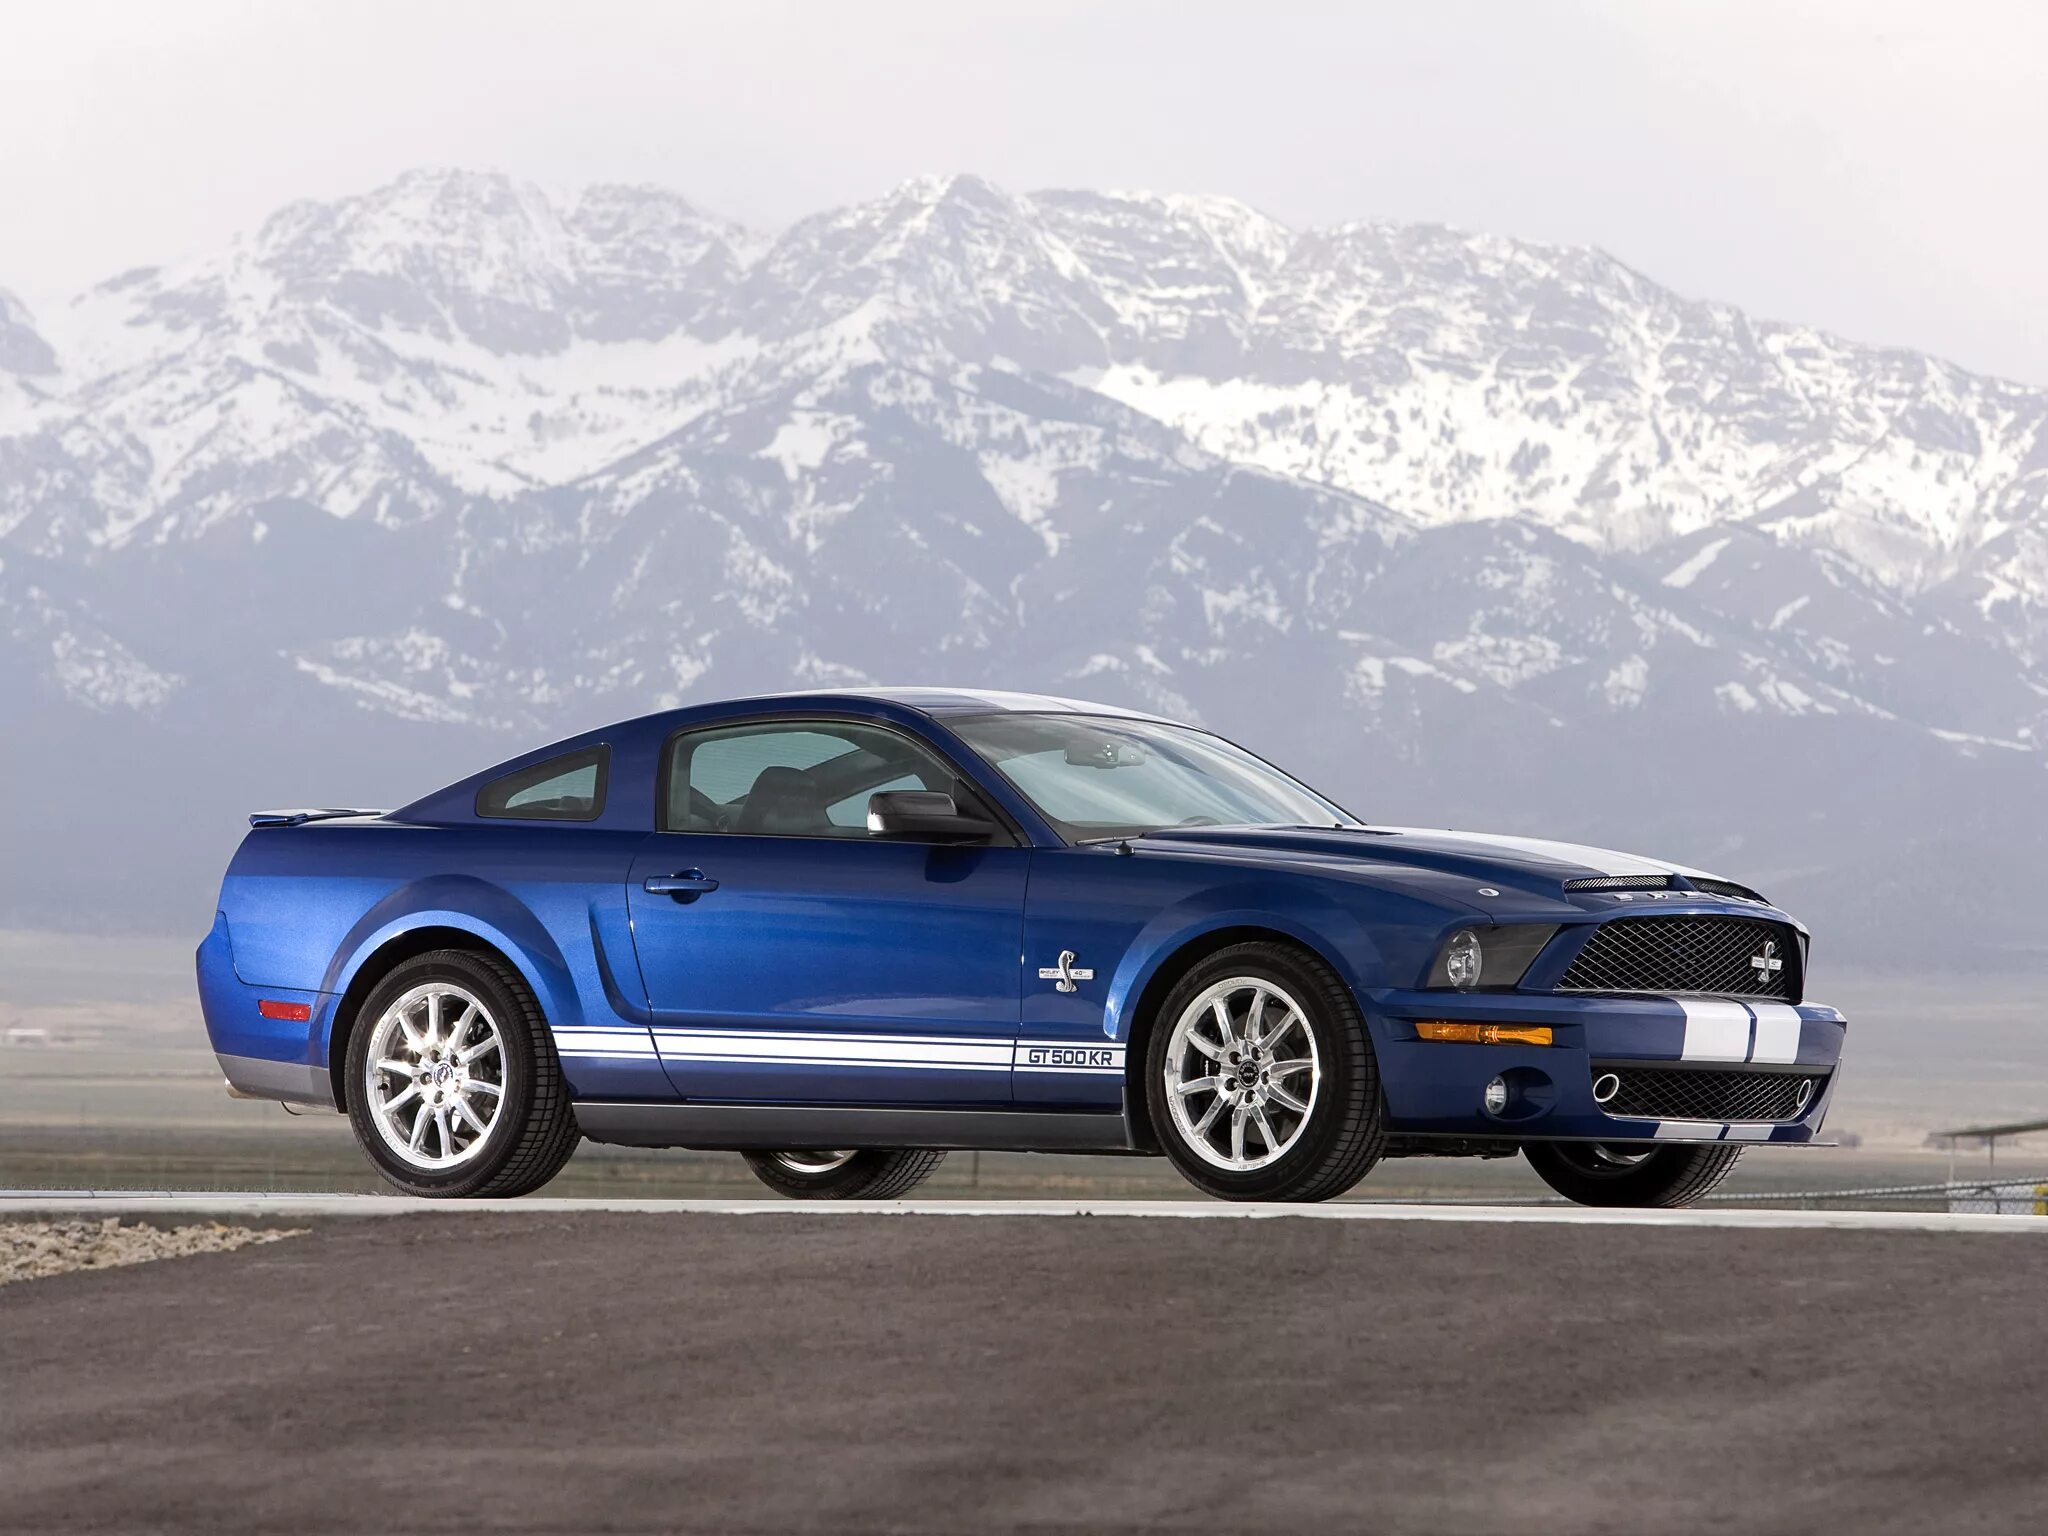 Ford Mustang Shelby gt500kr 2008. Ford Mustang gt500kr. Ford Shelby gt500kr 2008. Ford Shelby gt500kr. Мустанг 2008